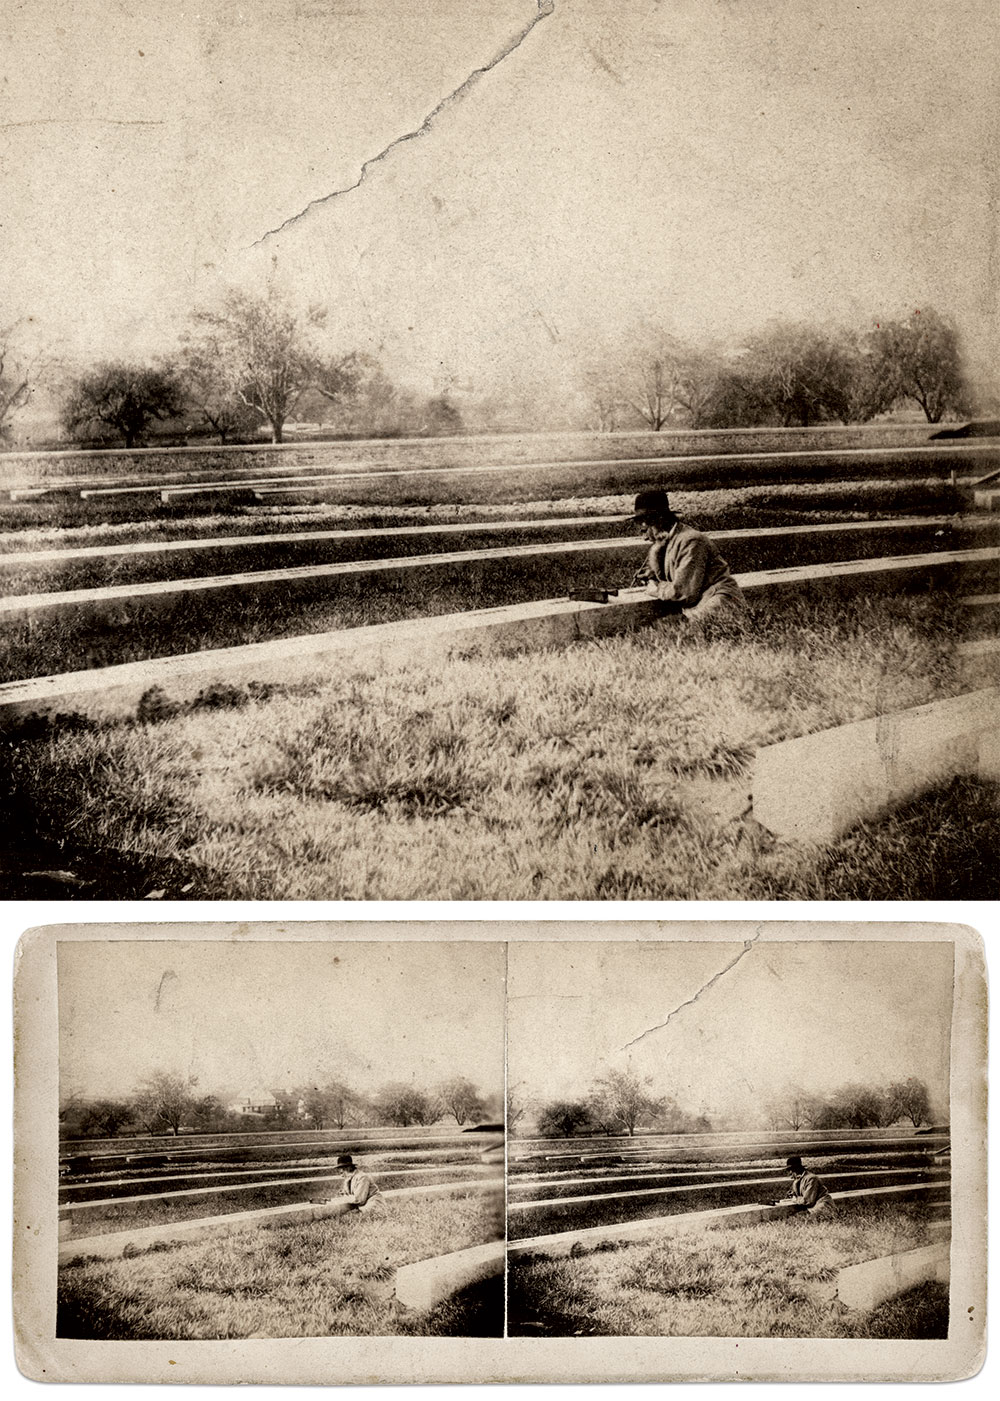 Samuel Weaver applying black paint to the letters on gravestones in the New Jersey Section during the summer of 1866. Stereo card by Hanson E. Weaver of Hanover, Pa.